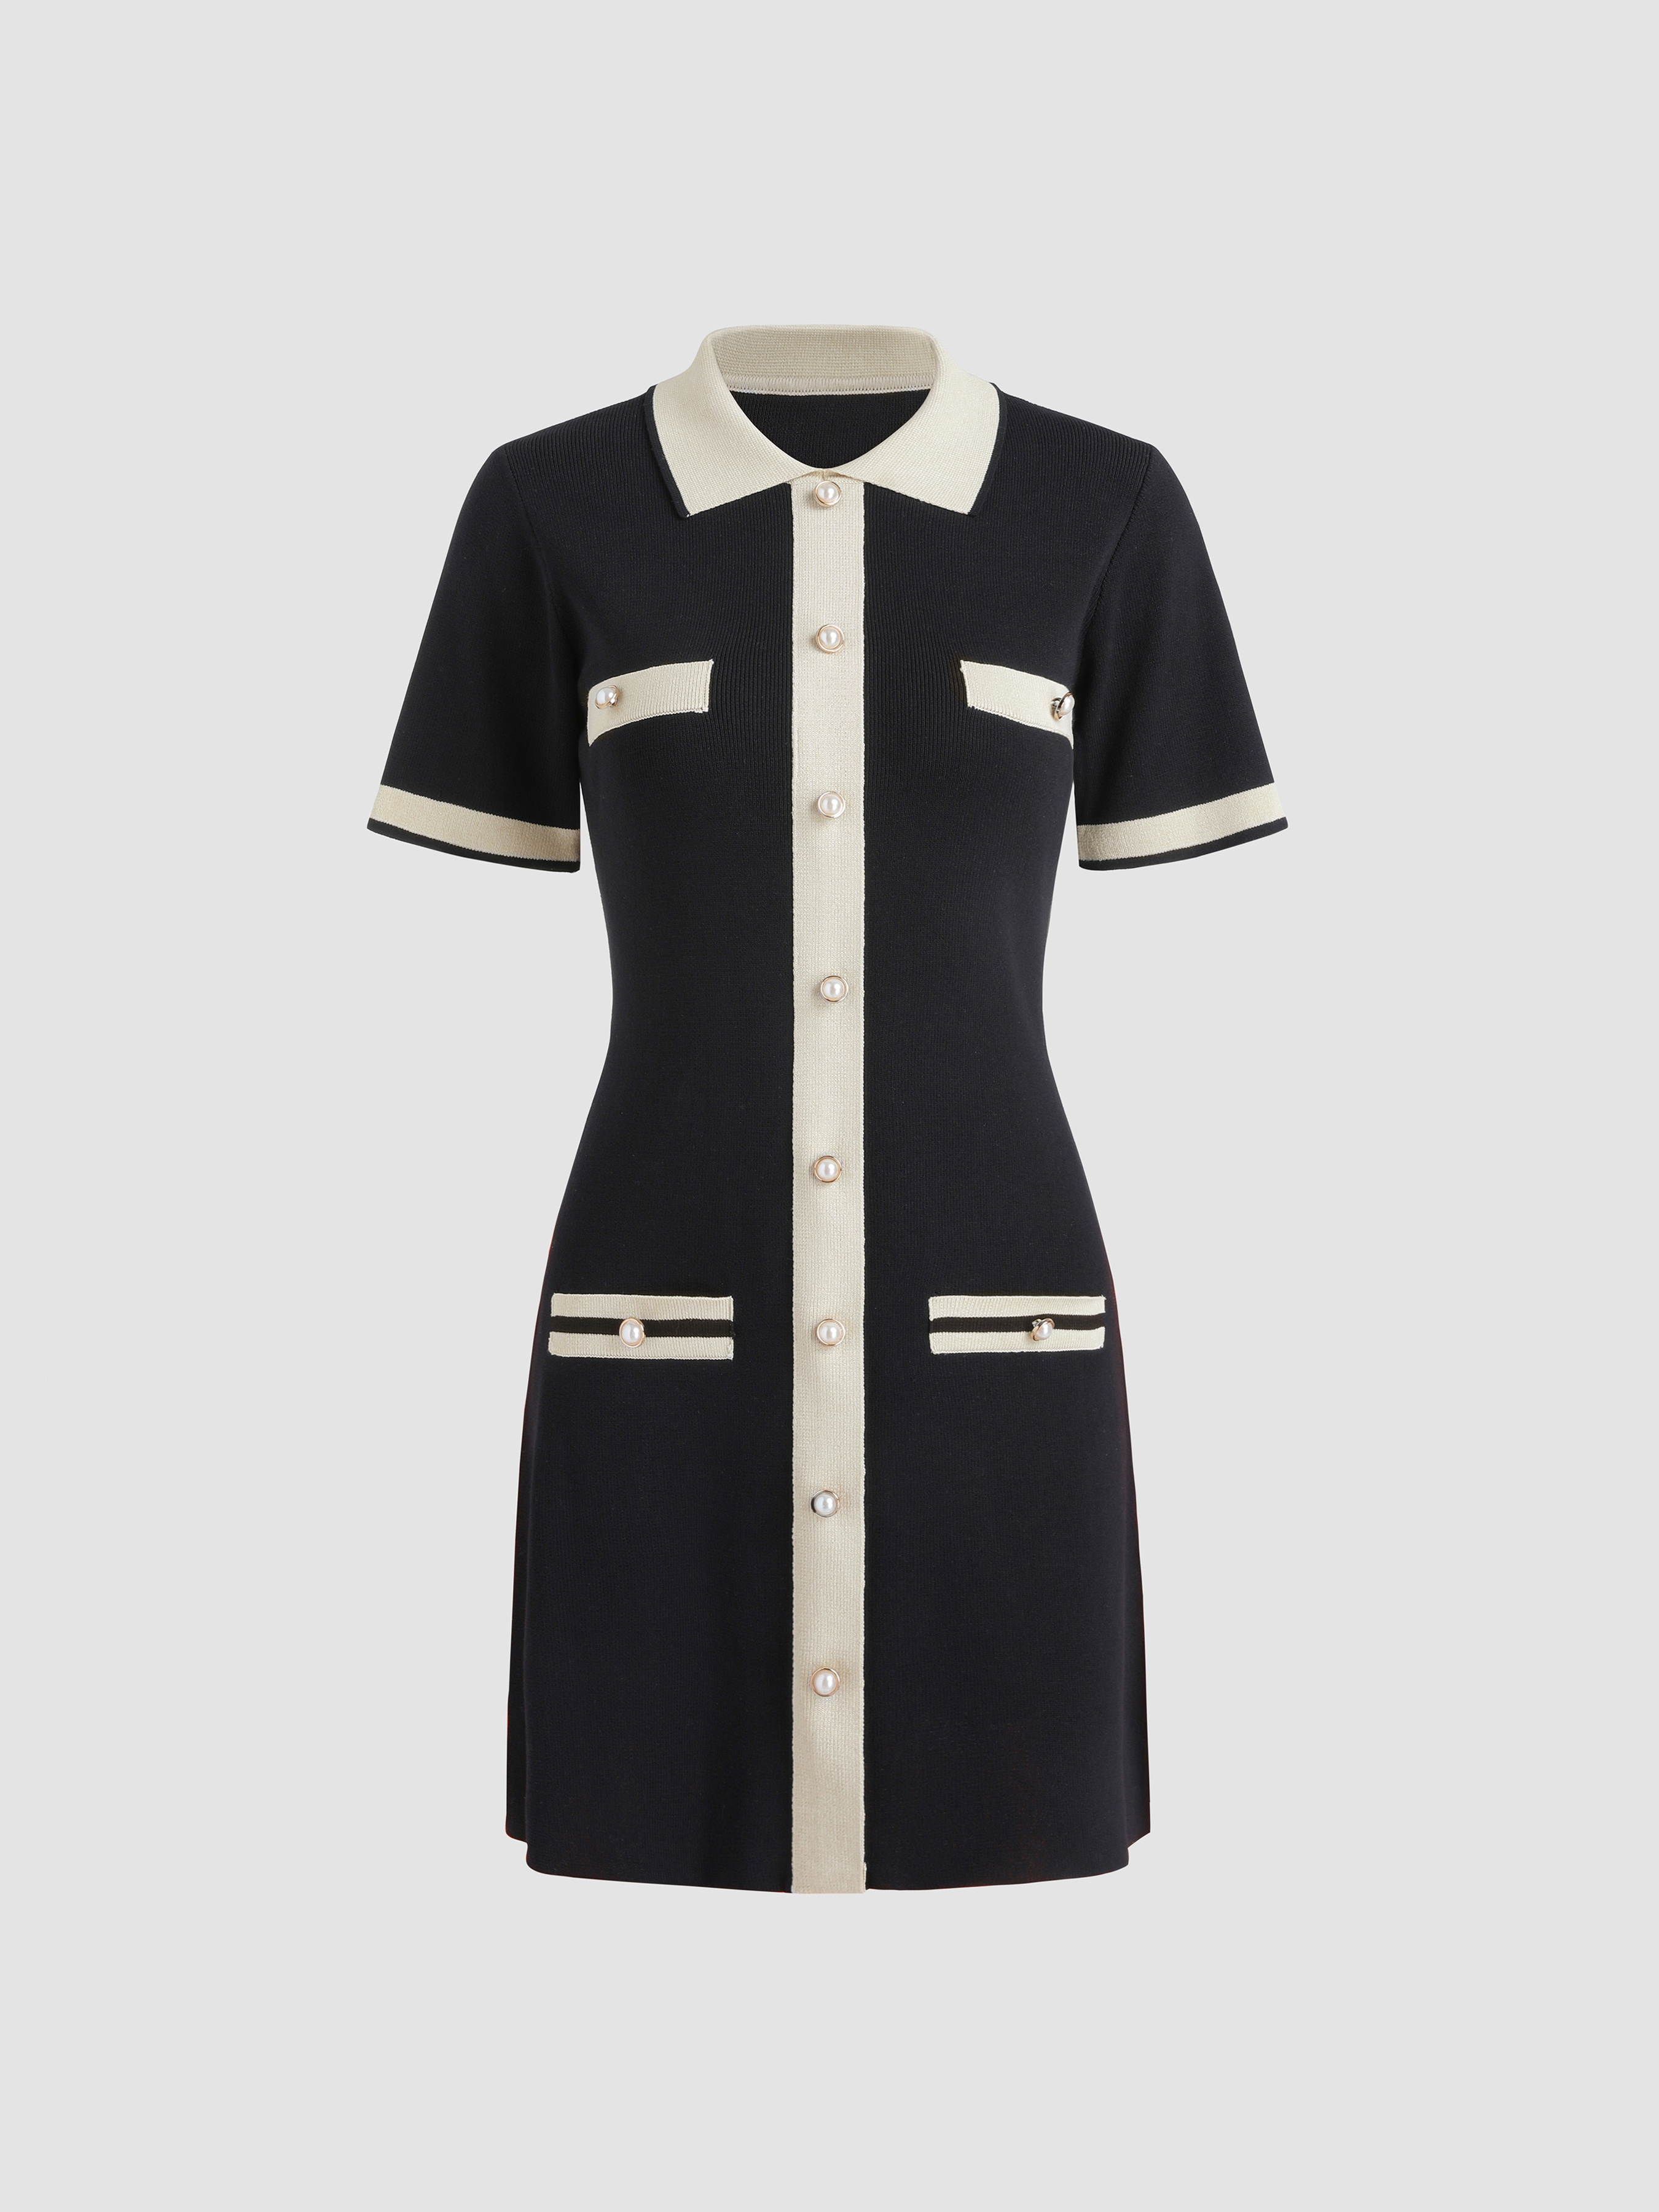 Contrasting Edge Pearl Knit Dress - Cider